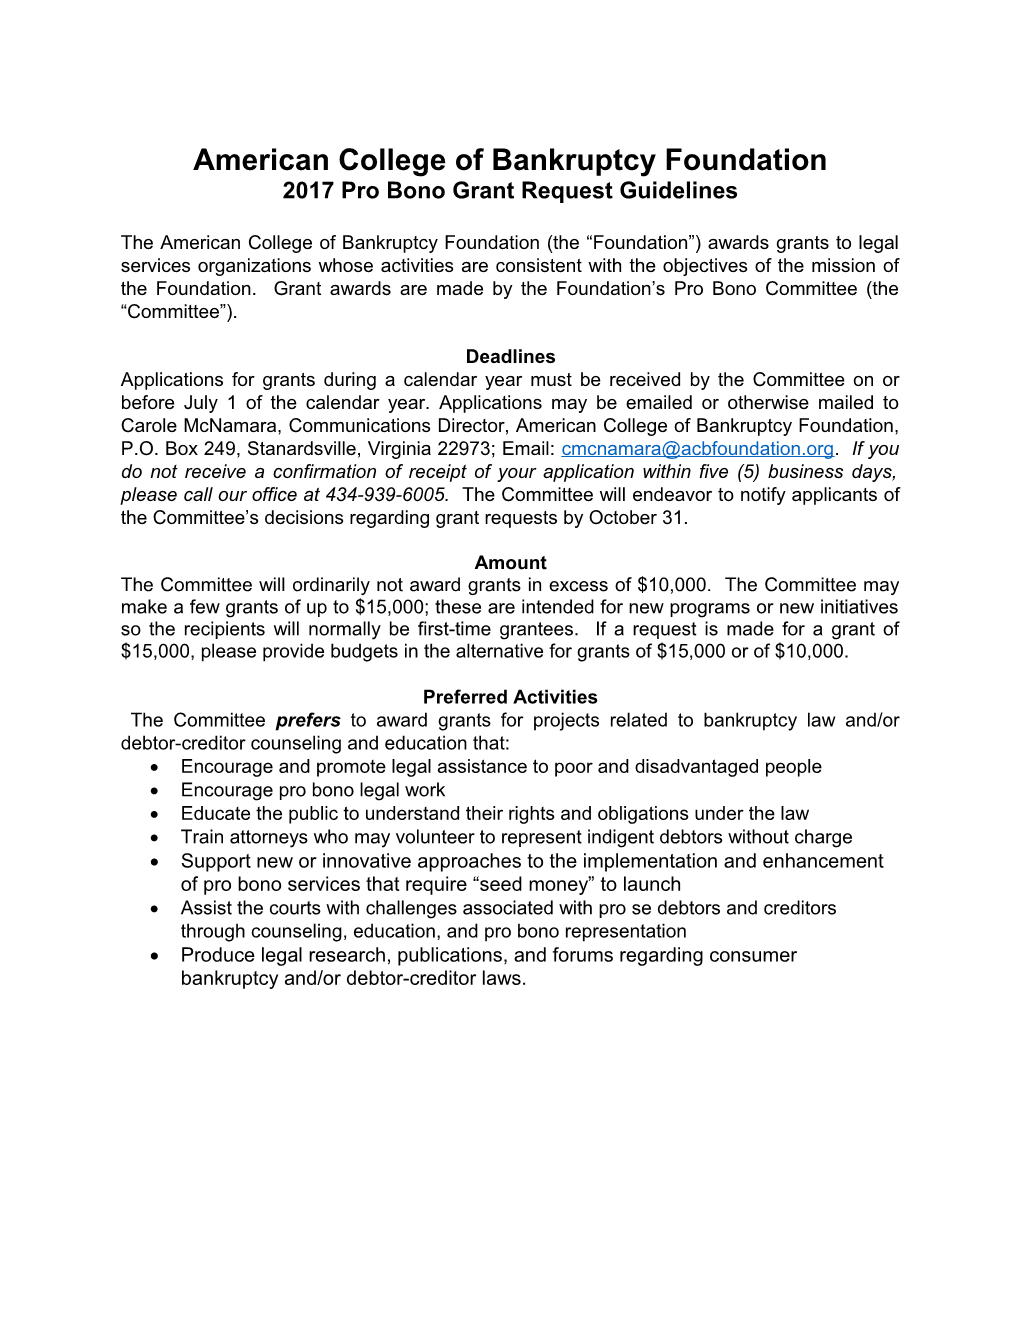 American College of Bankruptcy Foundation 2017 Pro Bono Grant Request Guidelines